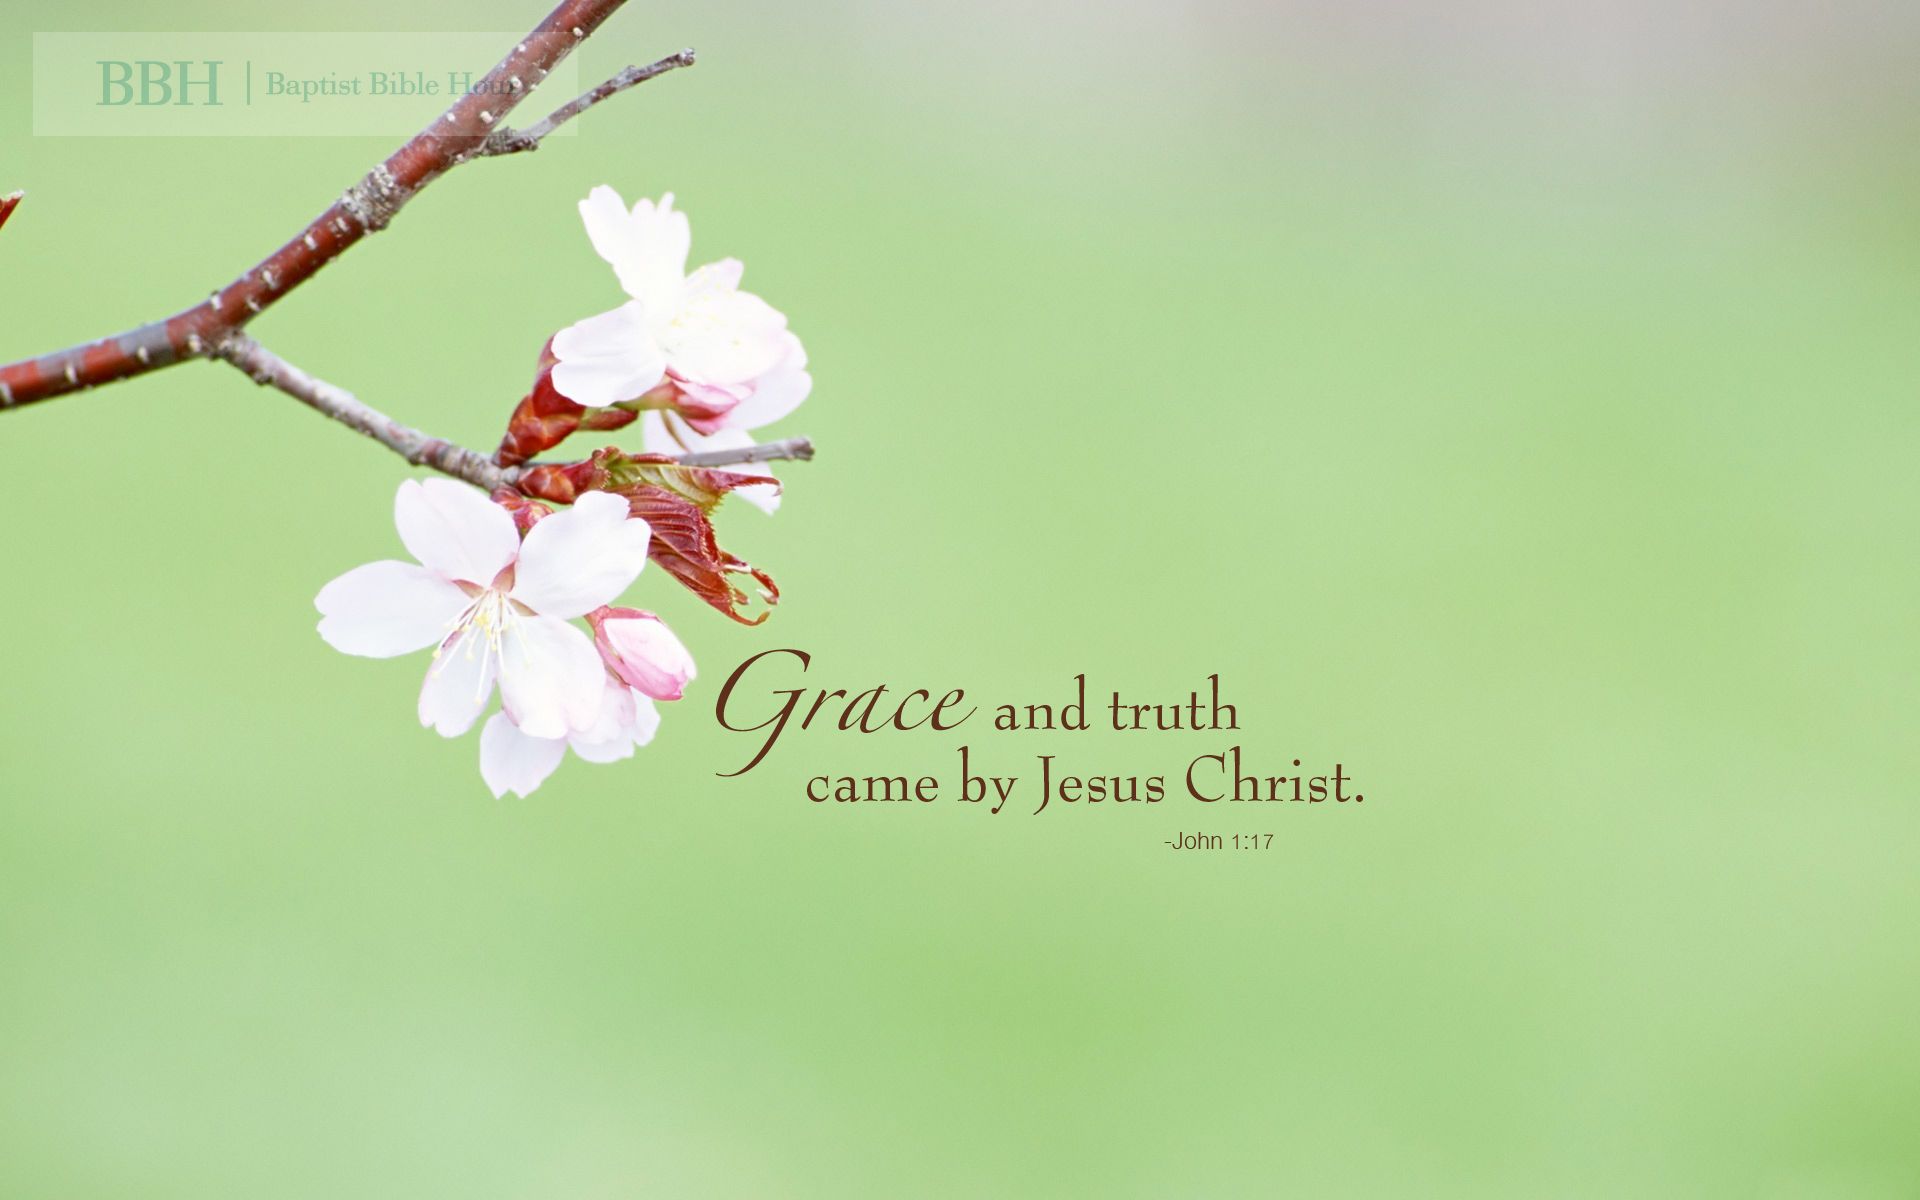 Wallpaper: Grace and truth came by Jesus Christ. -John 1:17